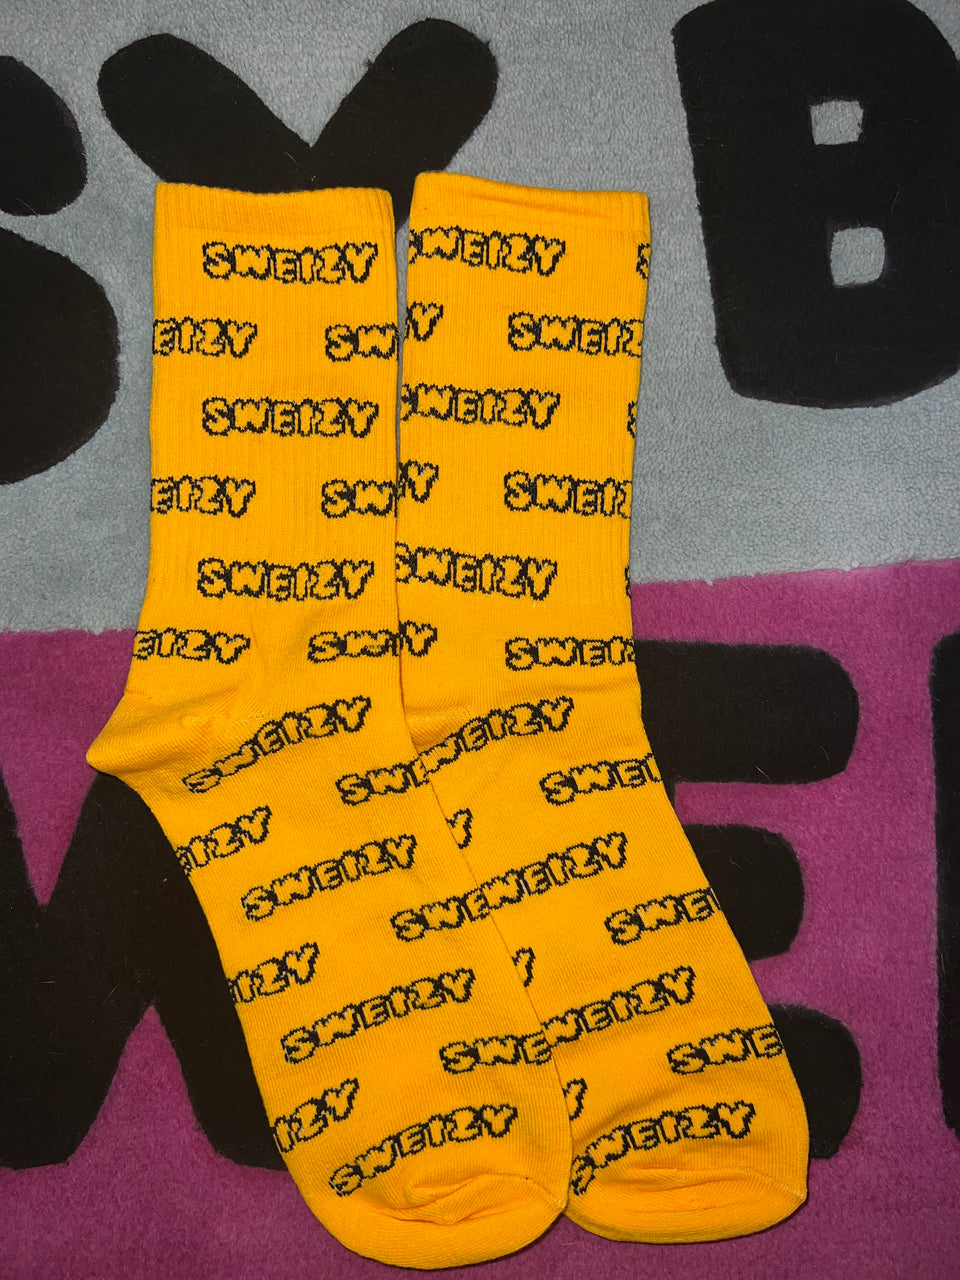 The Sweizy All-Over Socks